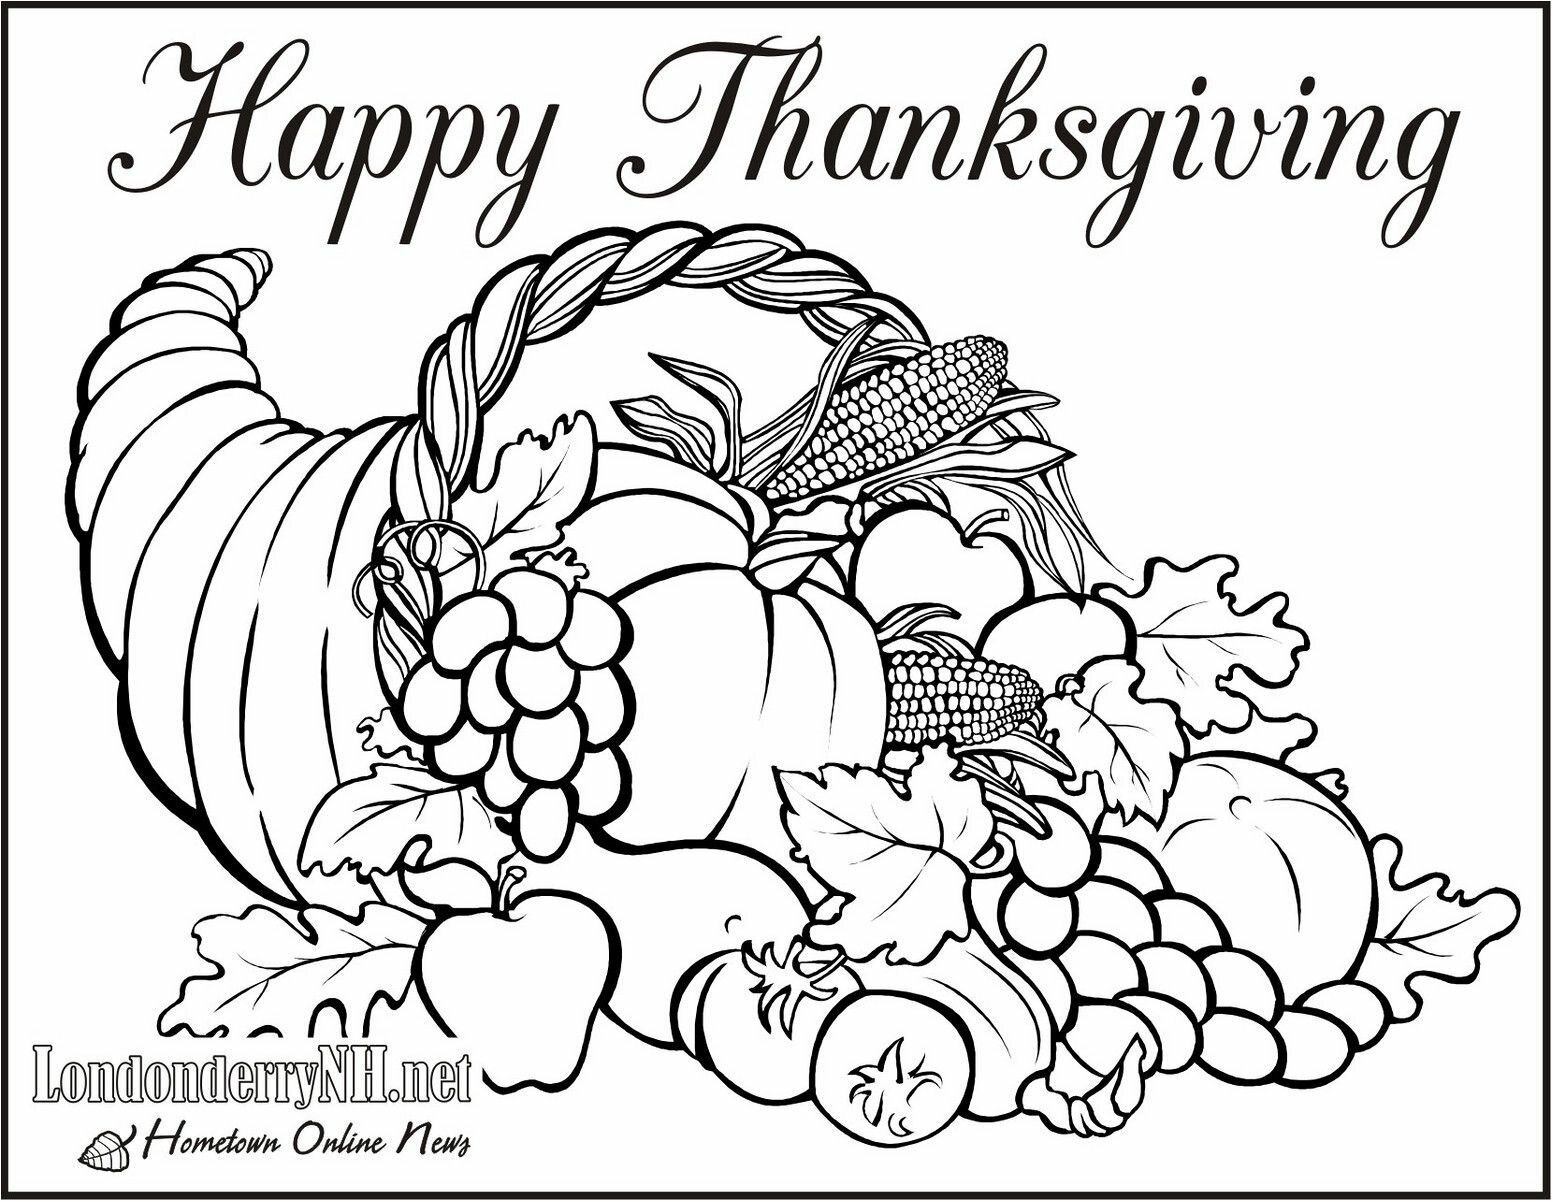 delightful Thanksgiving Coloring Pages Library delightful picture – free coloring pages for thanksgiving day